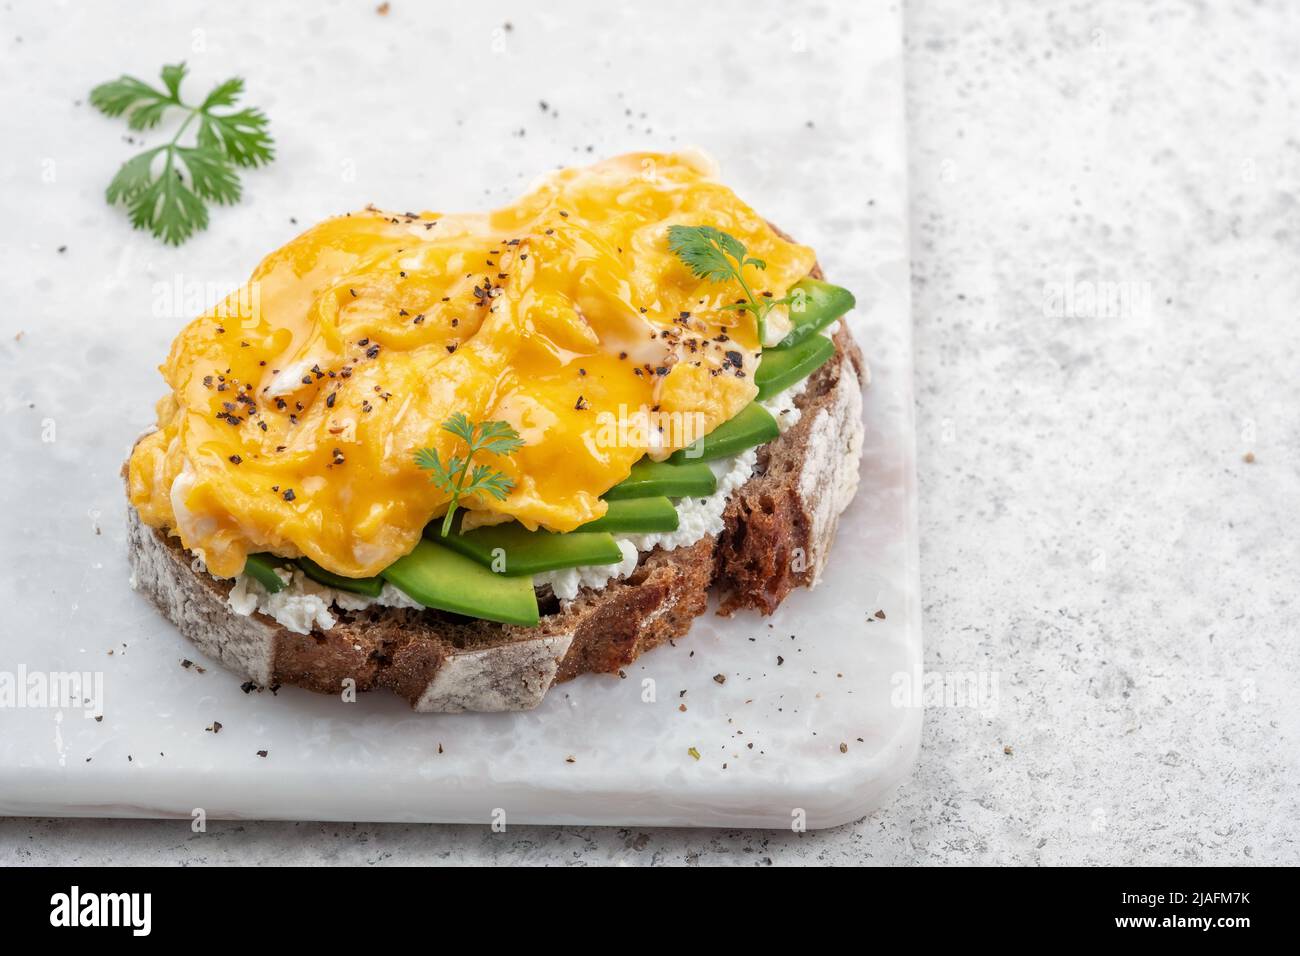 Scrambled eggs with avocado and cream cheese on toast. Breakfast food Stock Photo